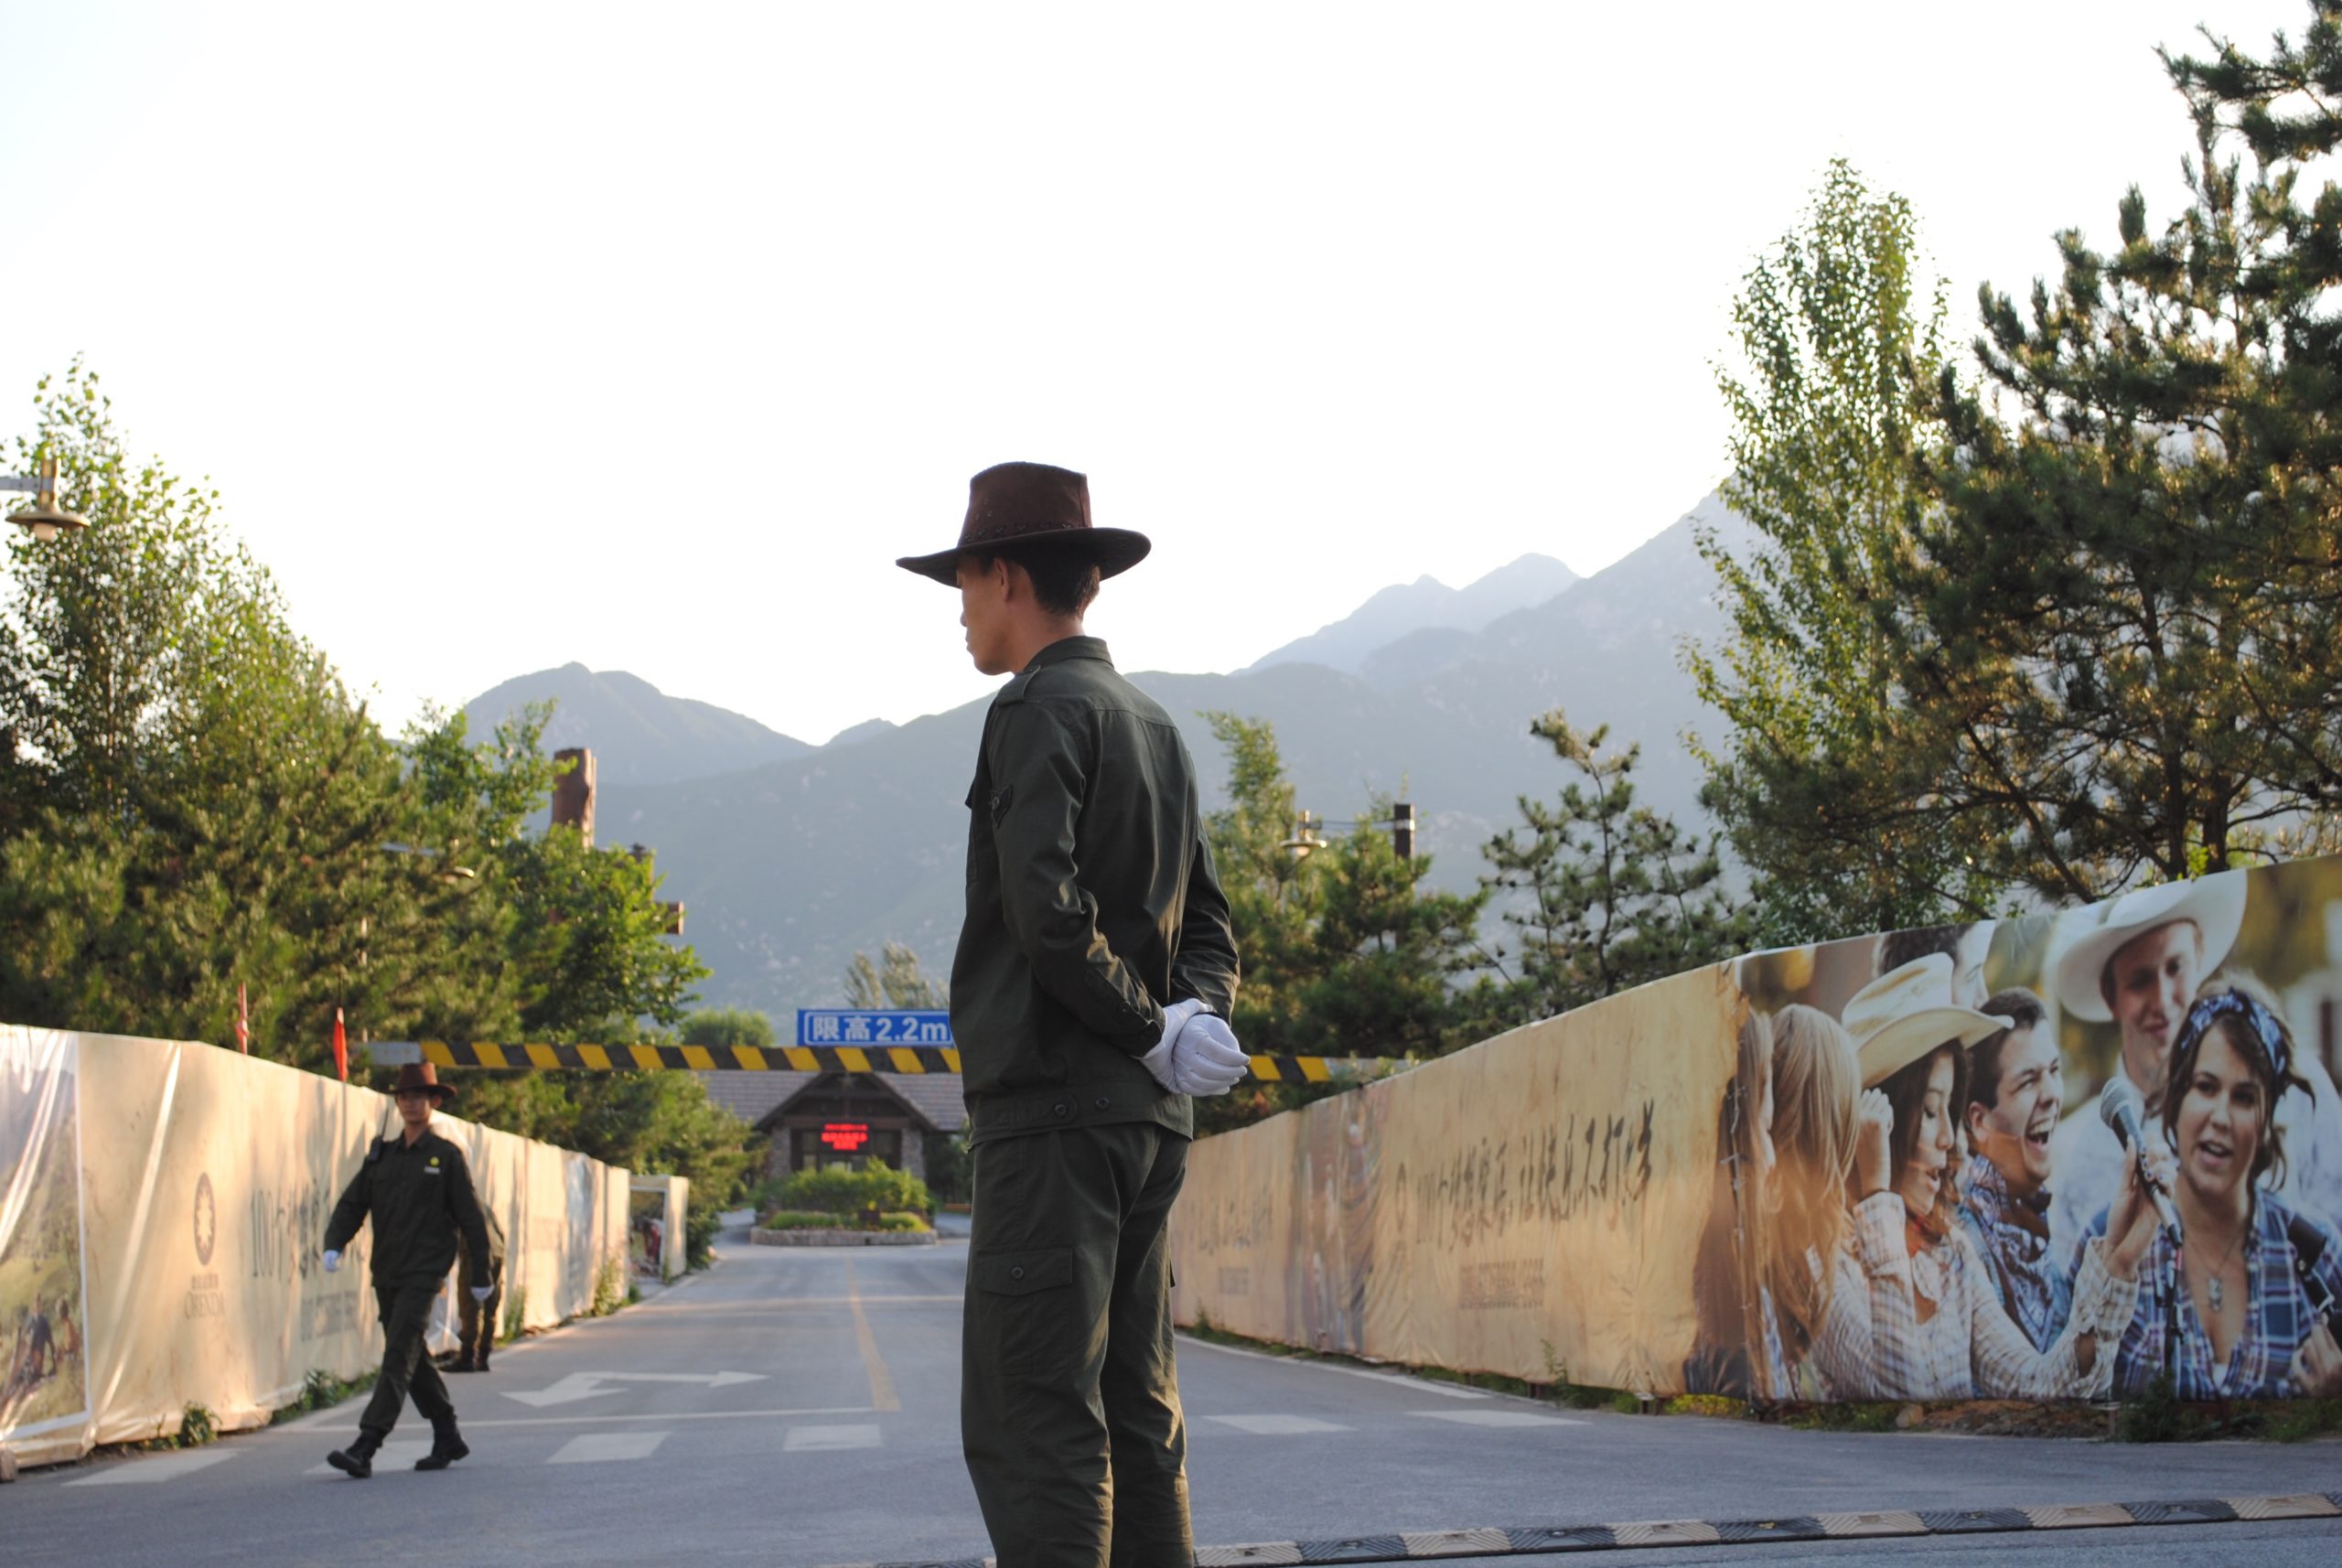 ‘Americaville’ Director On Jackson Hole’s Chinese Alter Ego